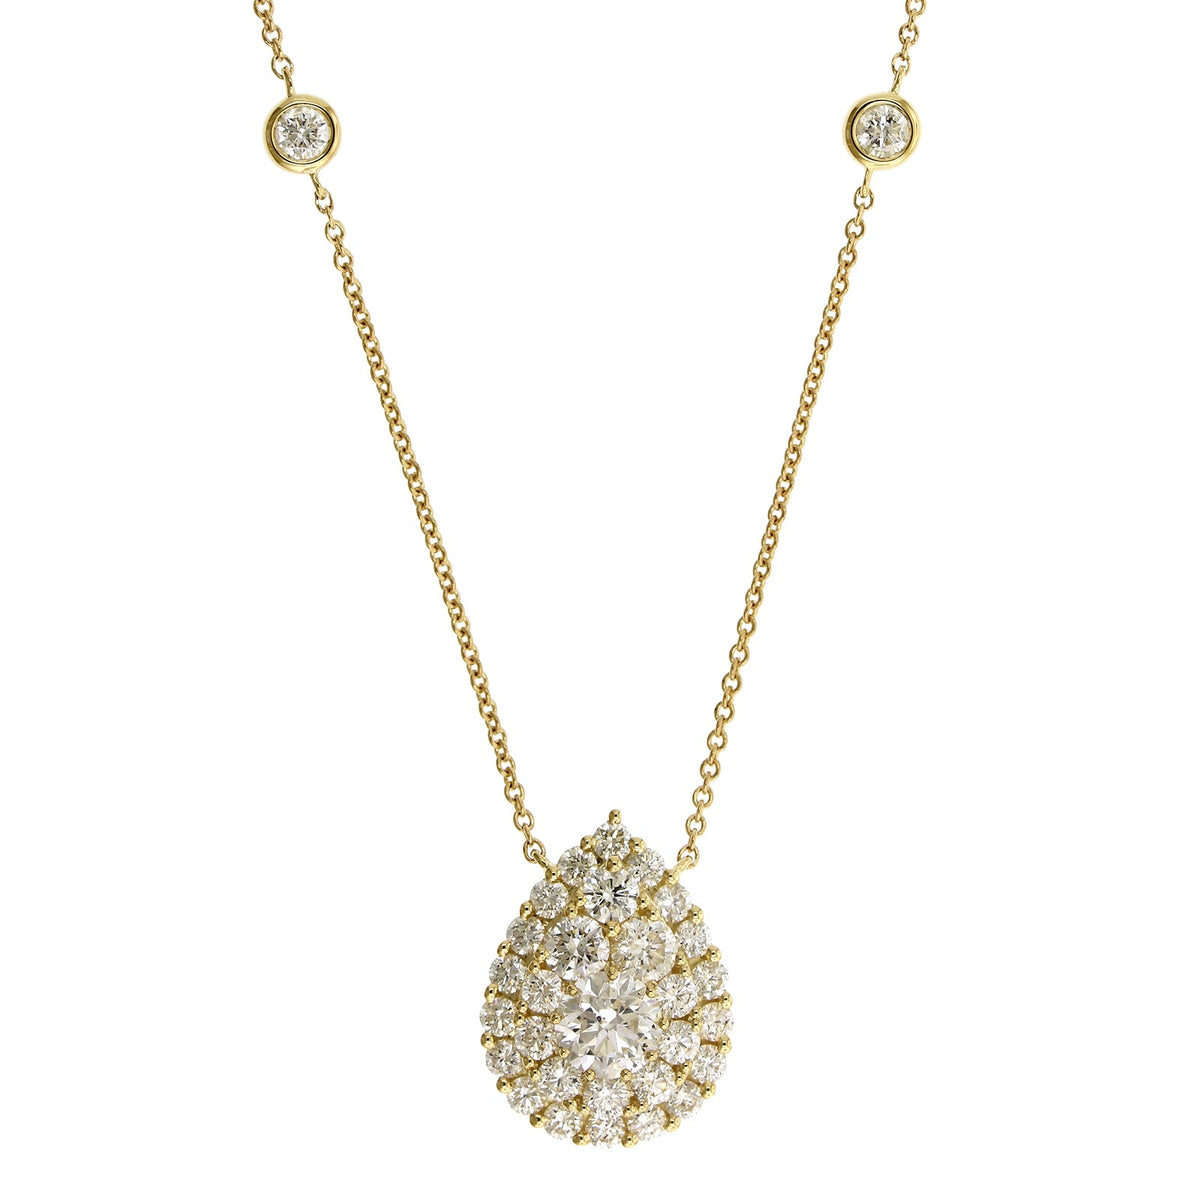 14K Yellow Gold Diamond Cluster Pear Shaped Pendant Necklace